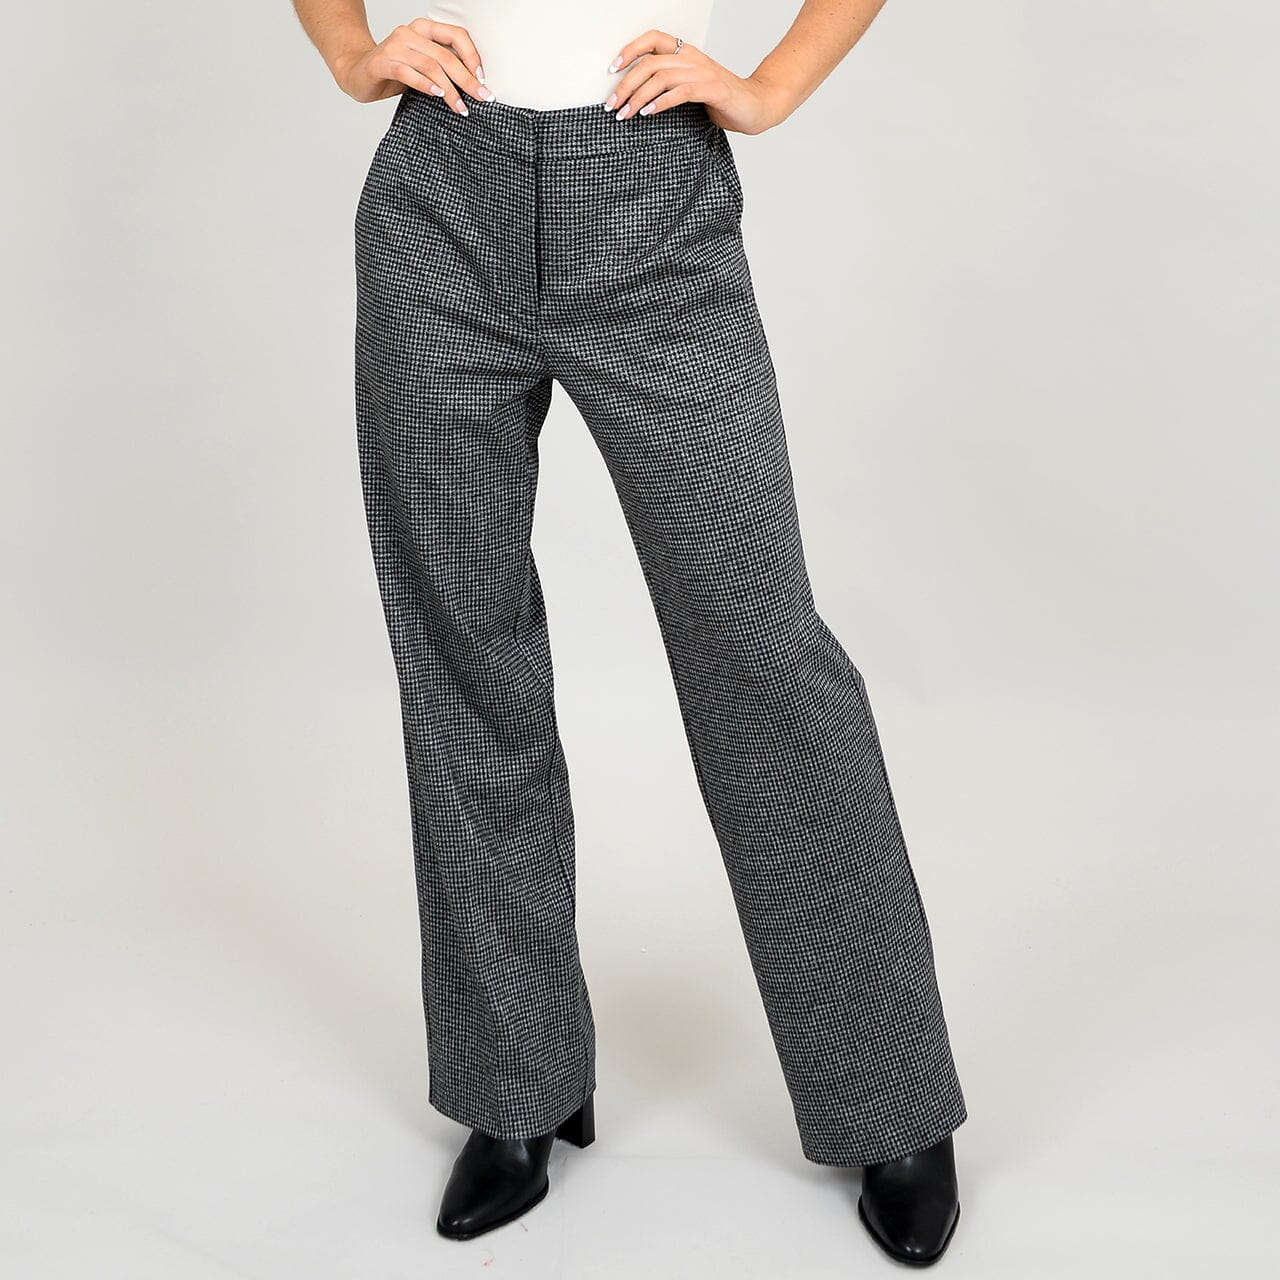 FOUNDER TROUSER PANT RD STYLE 